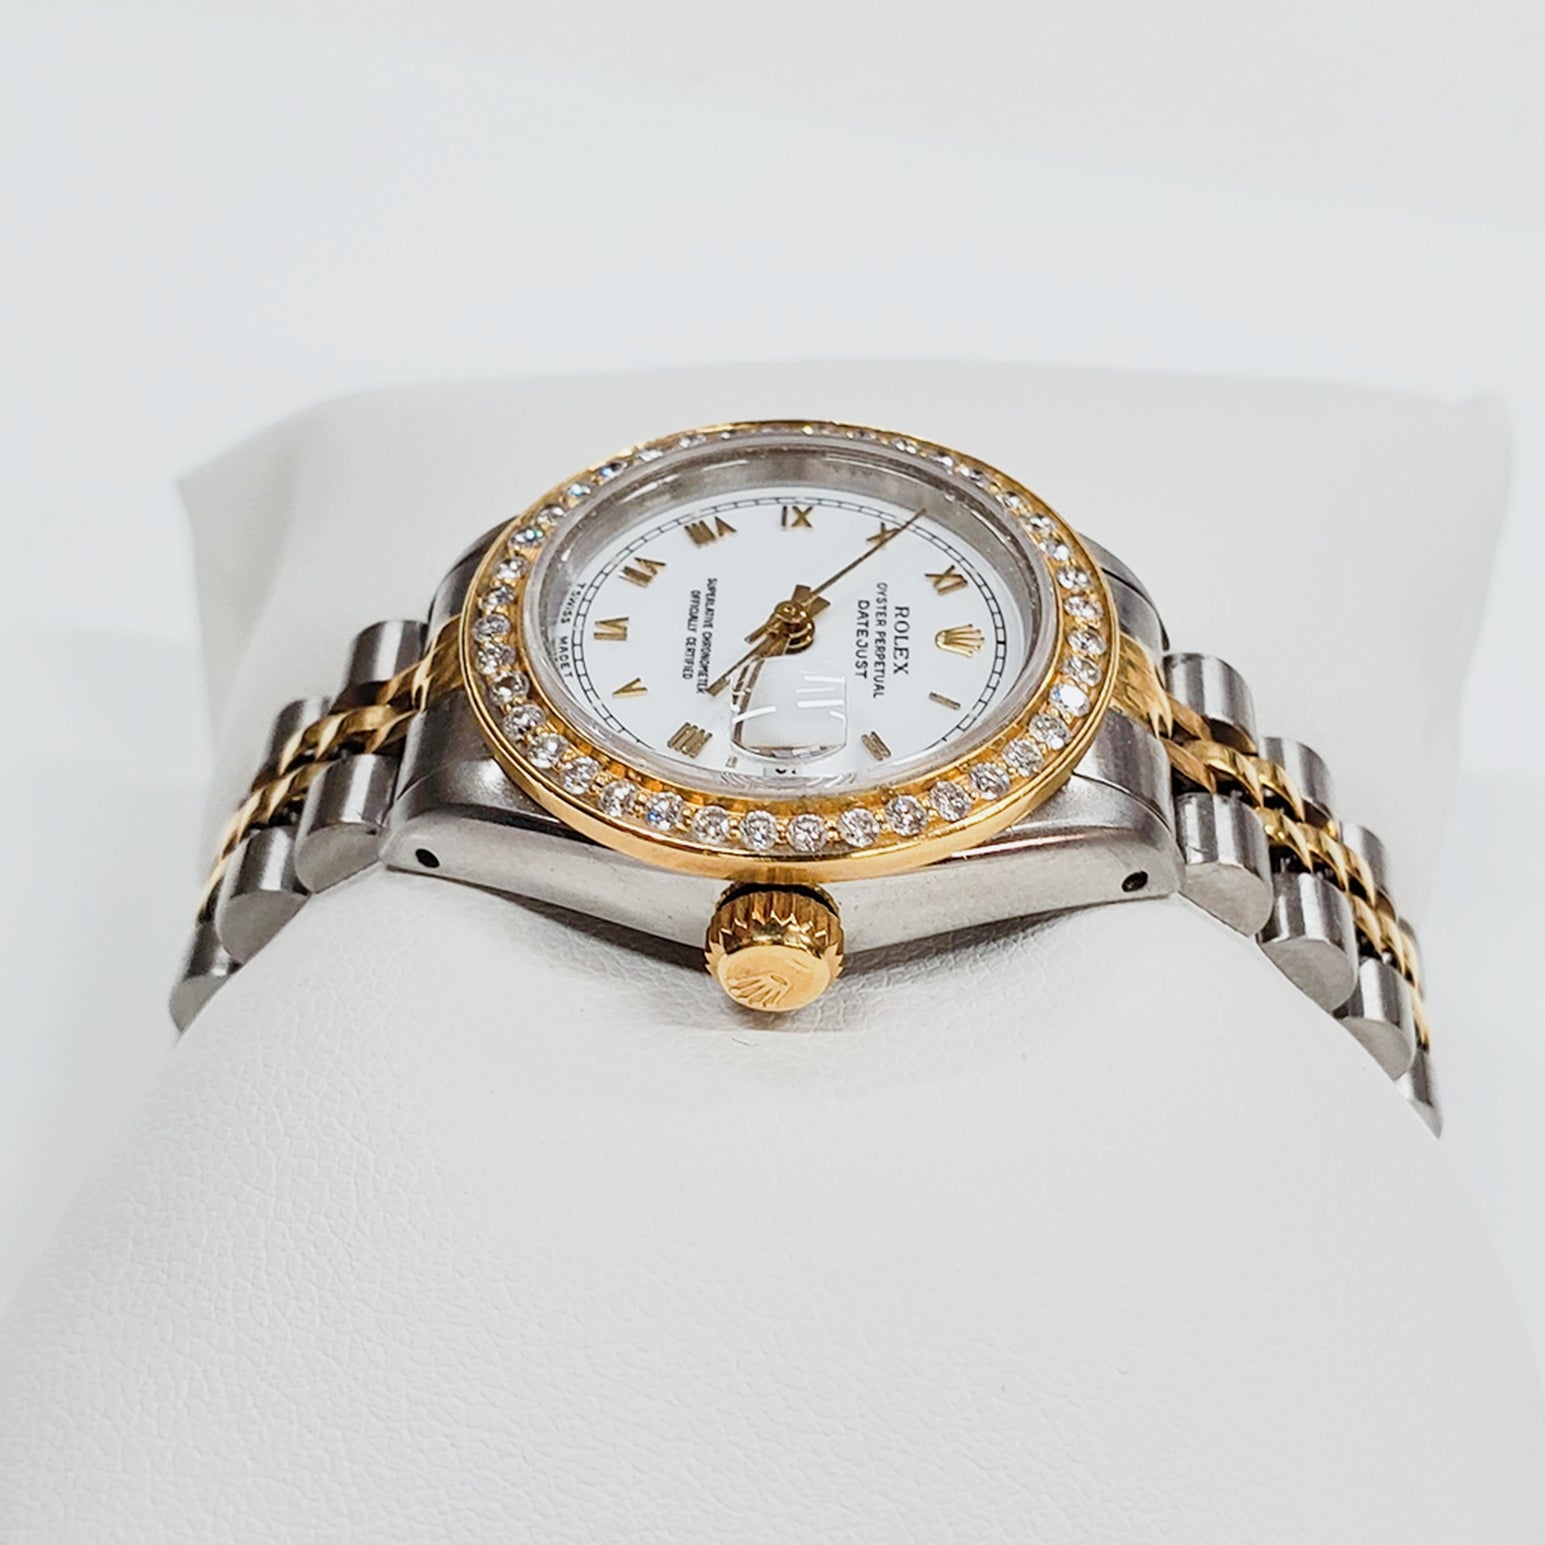 Ladies Rolex 18K Gold Two Tone 26mm DateJust Watch with Roman Numerals, White Dial and Diamond Bezel. (Pre-Owned)